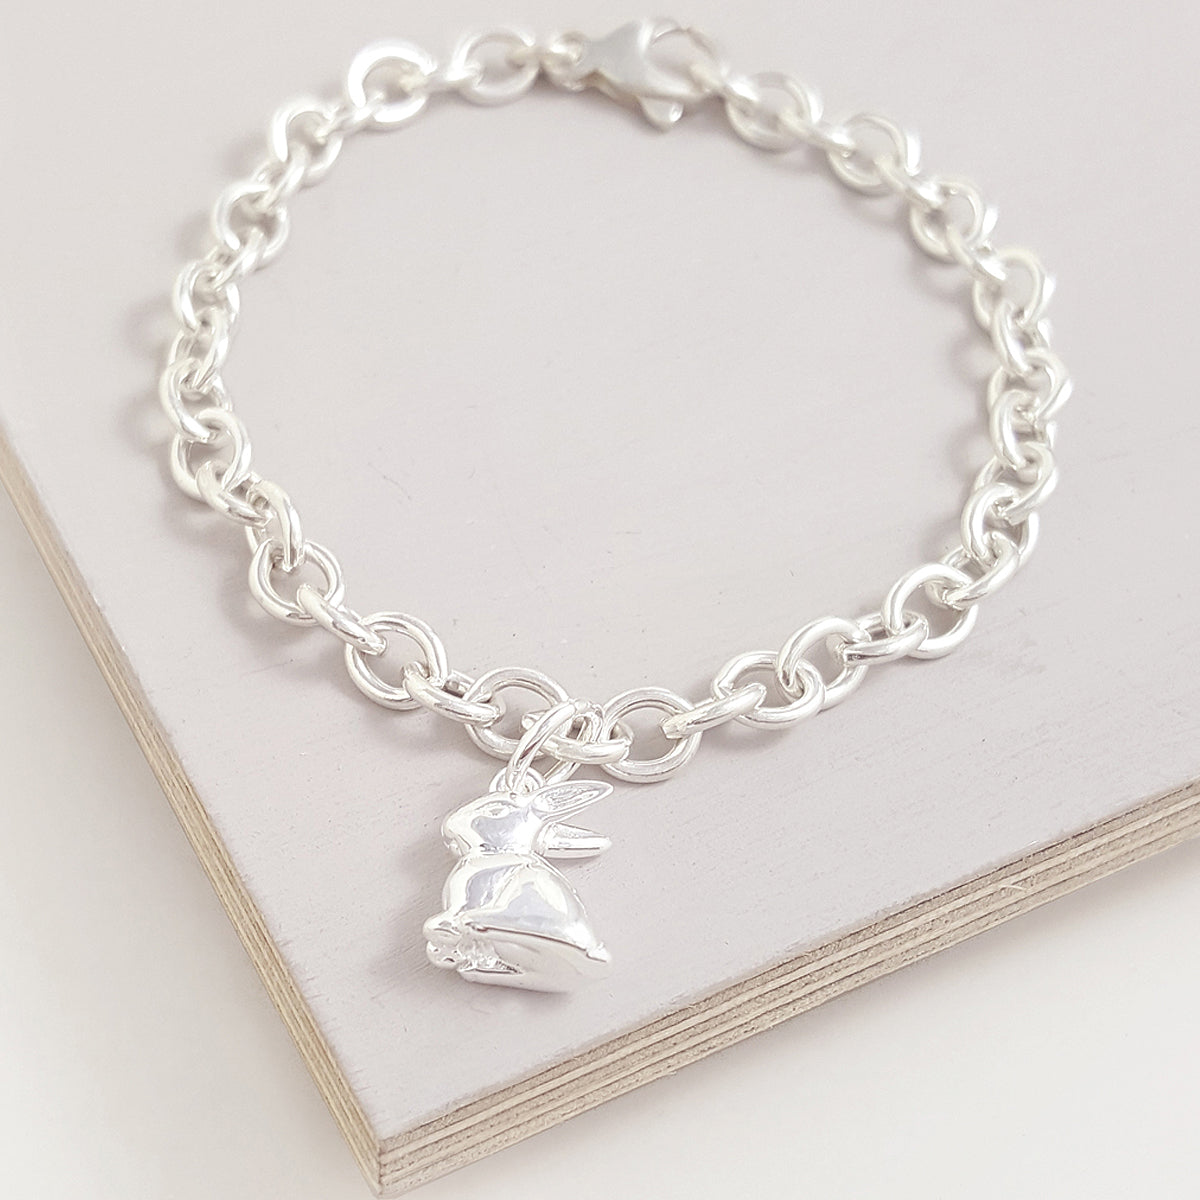 Sterling silver bunny rabbit charm fits all charm bracelets FREE UK DELIVERY